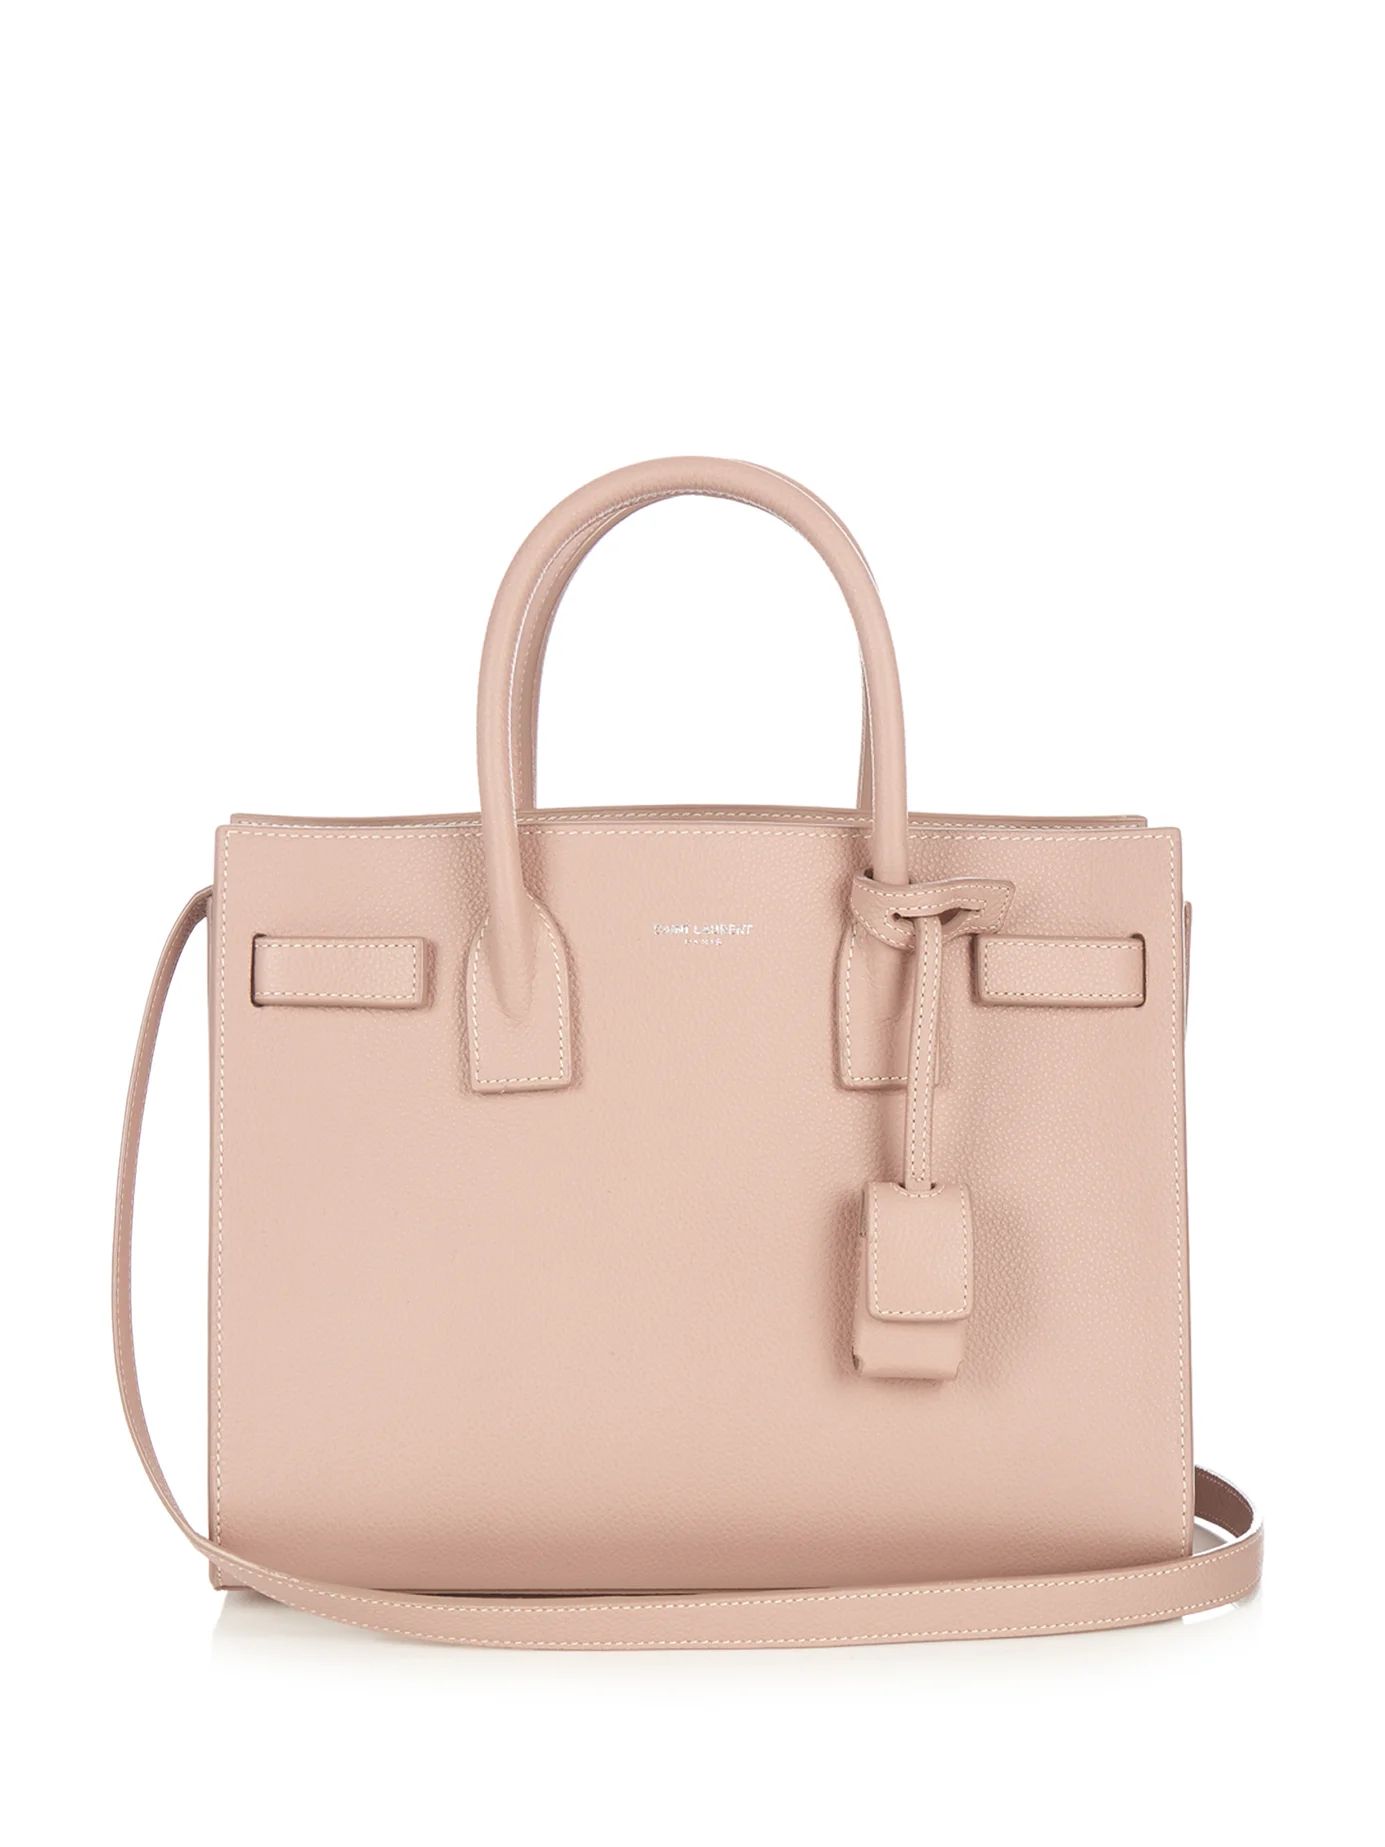 Sac De Jour baby grained-leather tote | Matches (US)